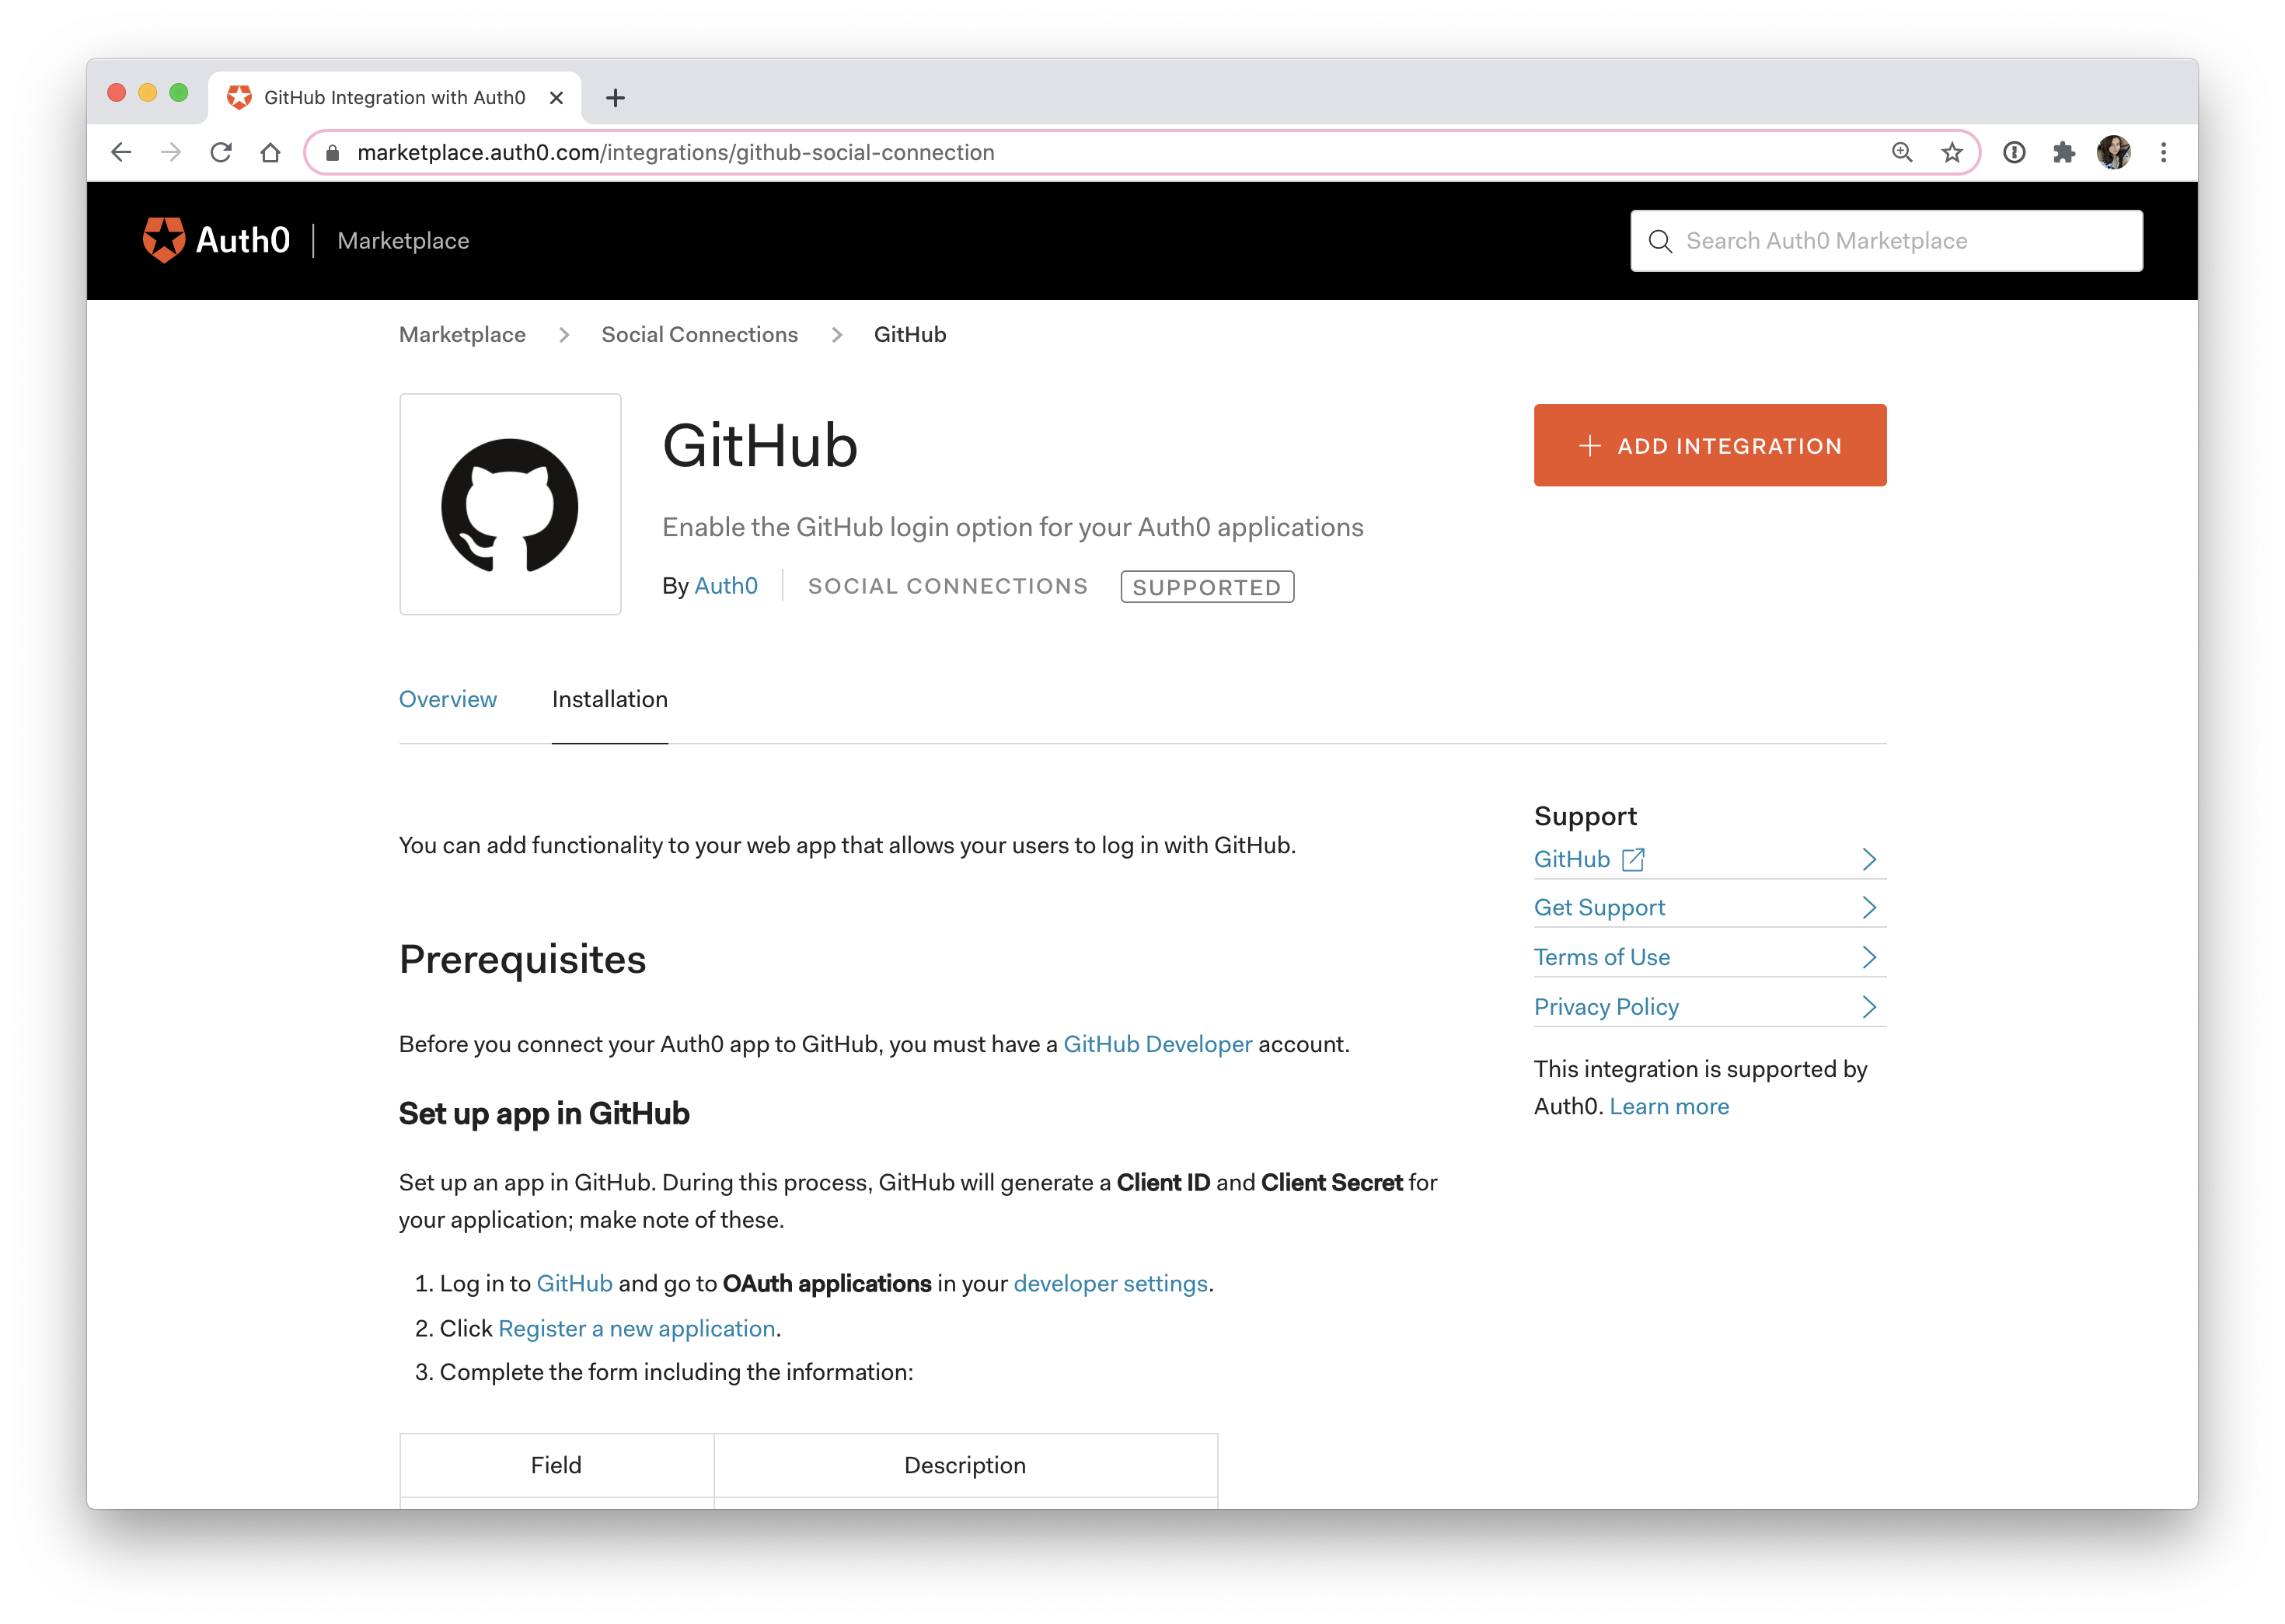 Auth0 Marketplace GitHub social connection installation steps